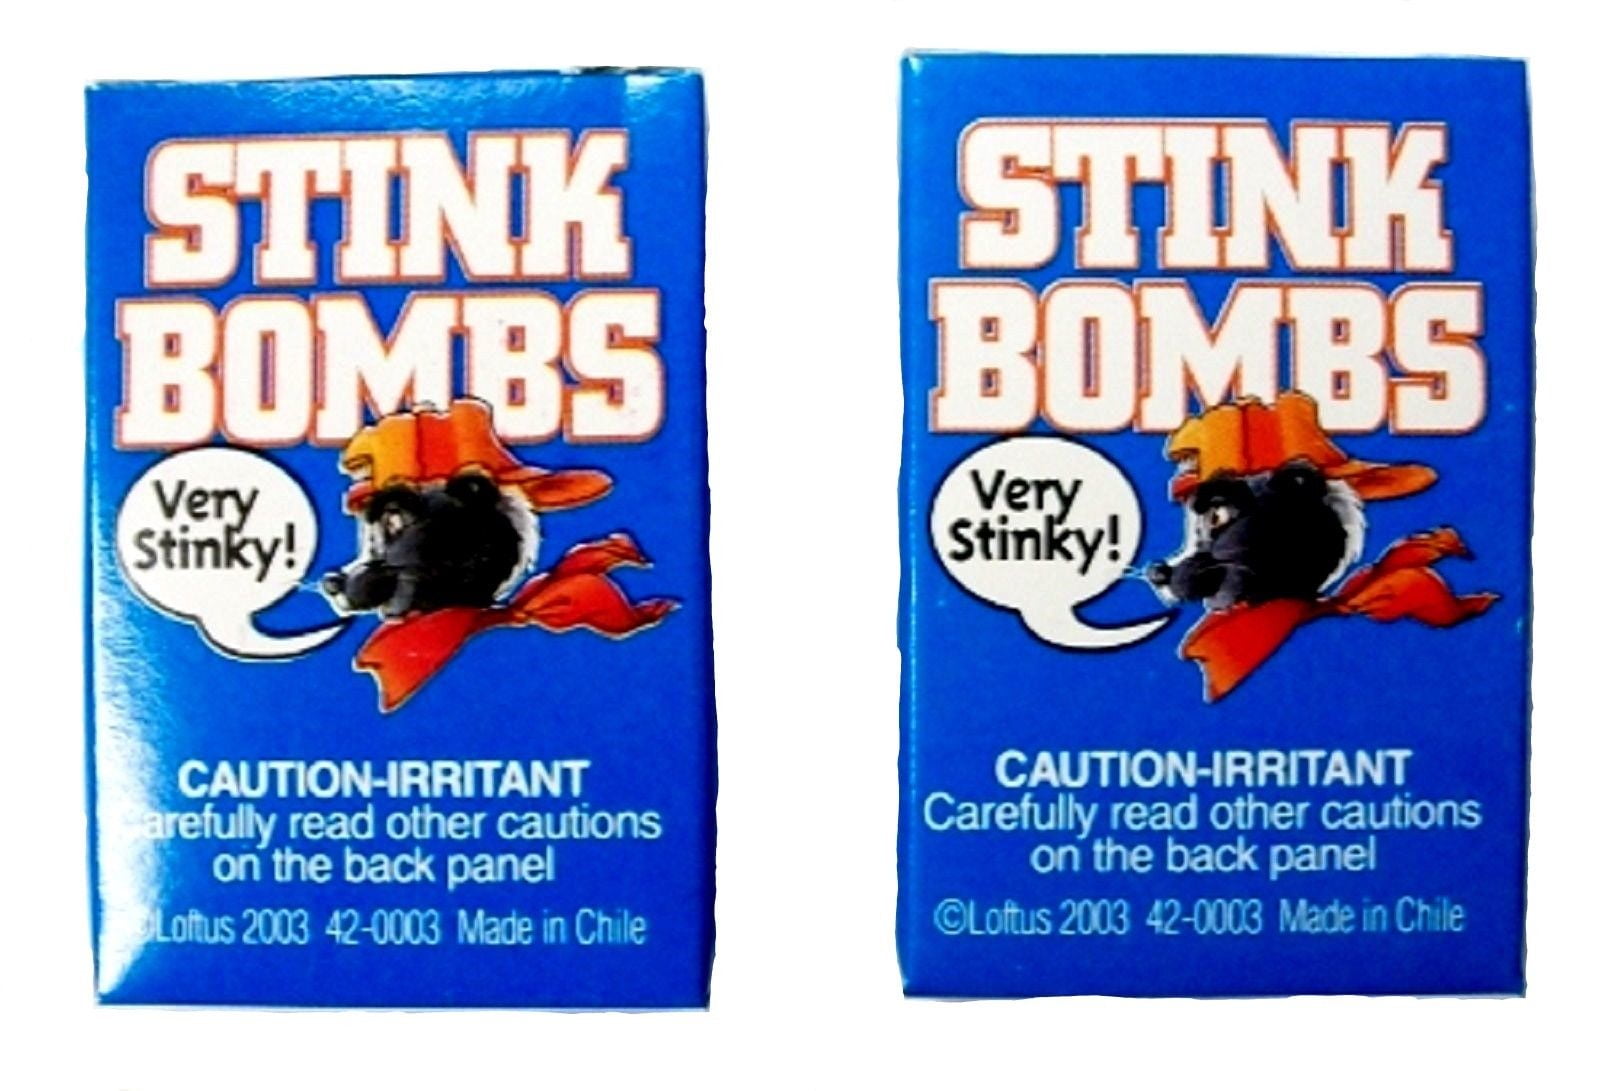 4 BOXES OF 3 BOMBS SMELLS OF FARTS ROTTEN EGGS 12 STINK BOMBS JOKE SHOP PRANKS 